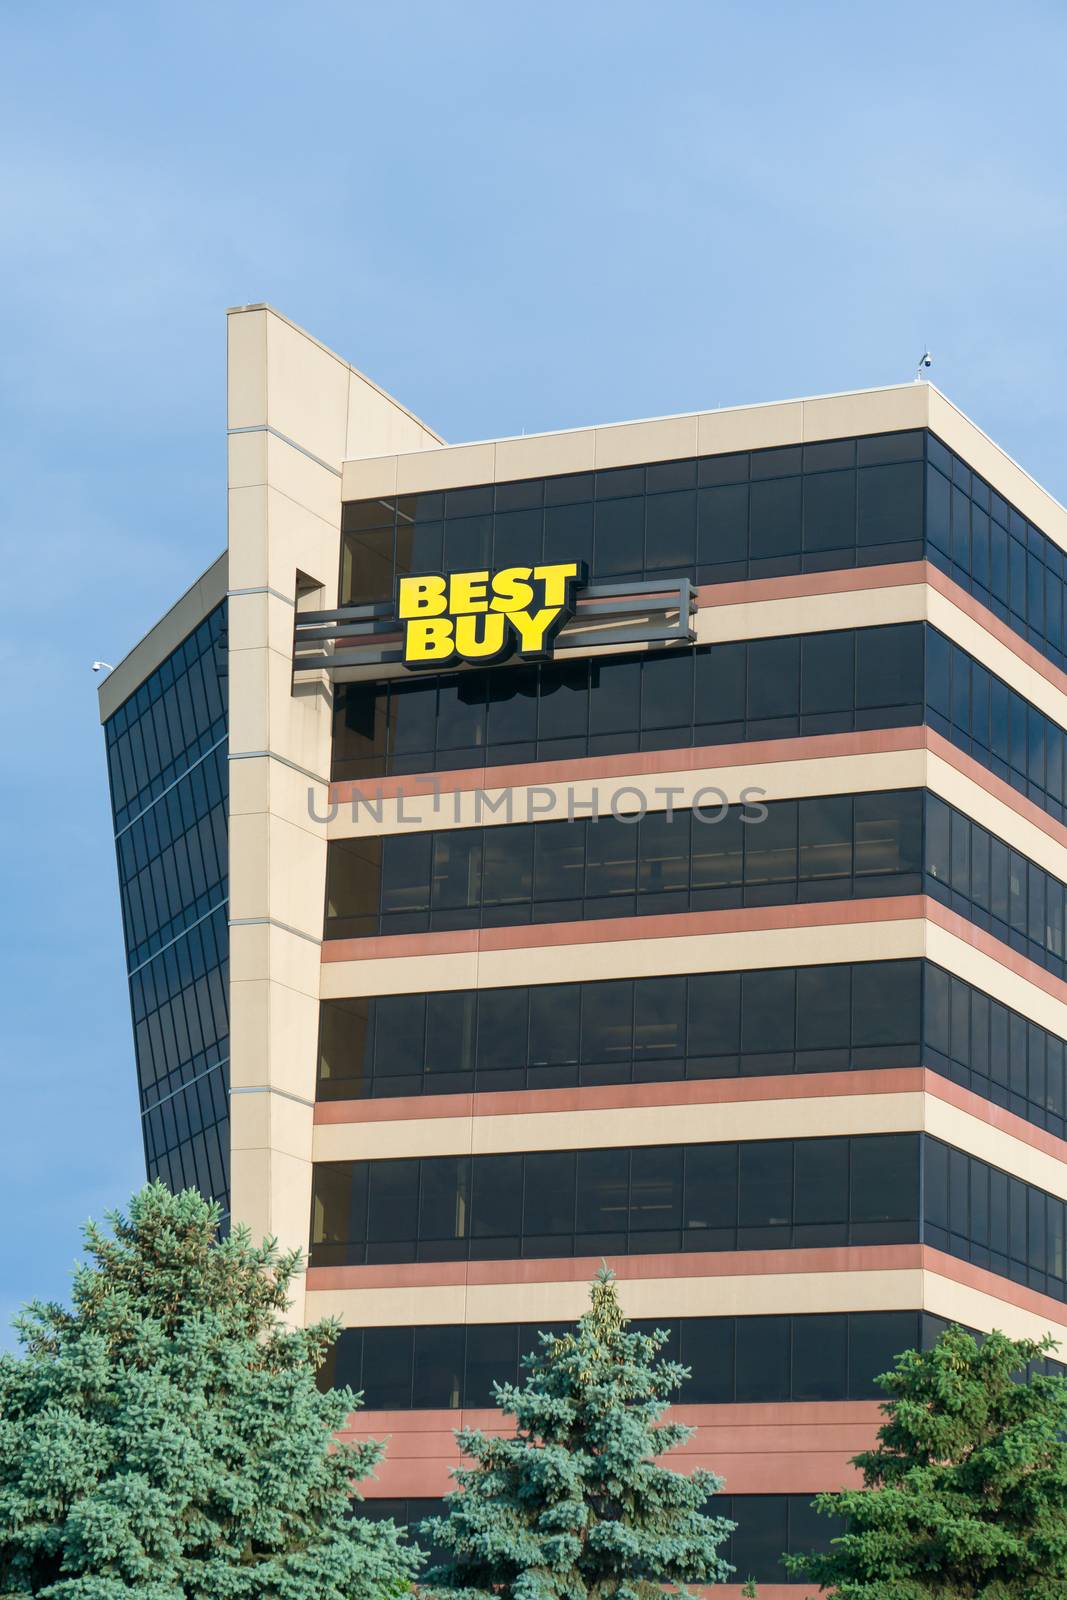 RICHFIELD, MN/USA - MAY 30, 2016:  Best Buy corporate headquarters building. Best Buy is an American multinational consumer electronics corporation.